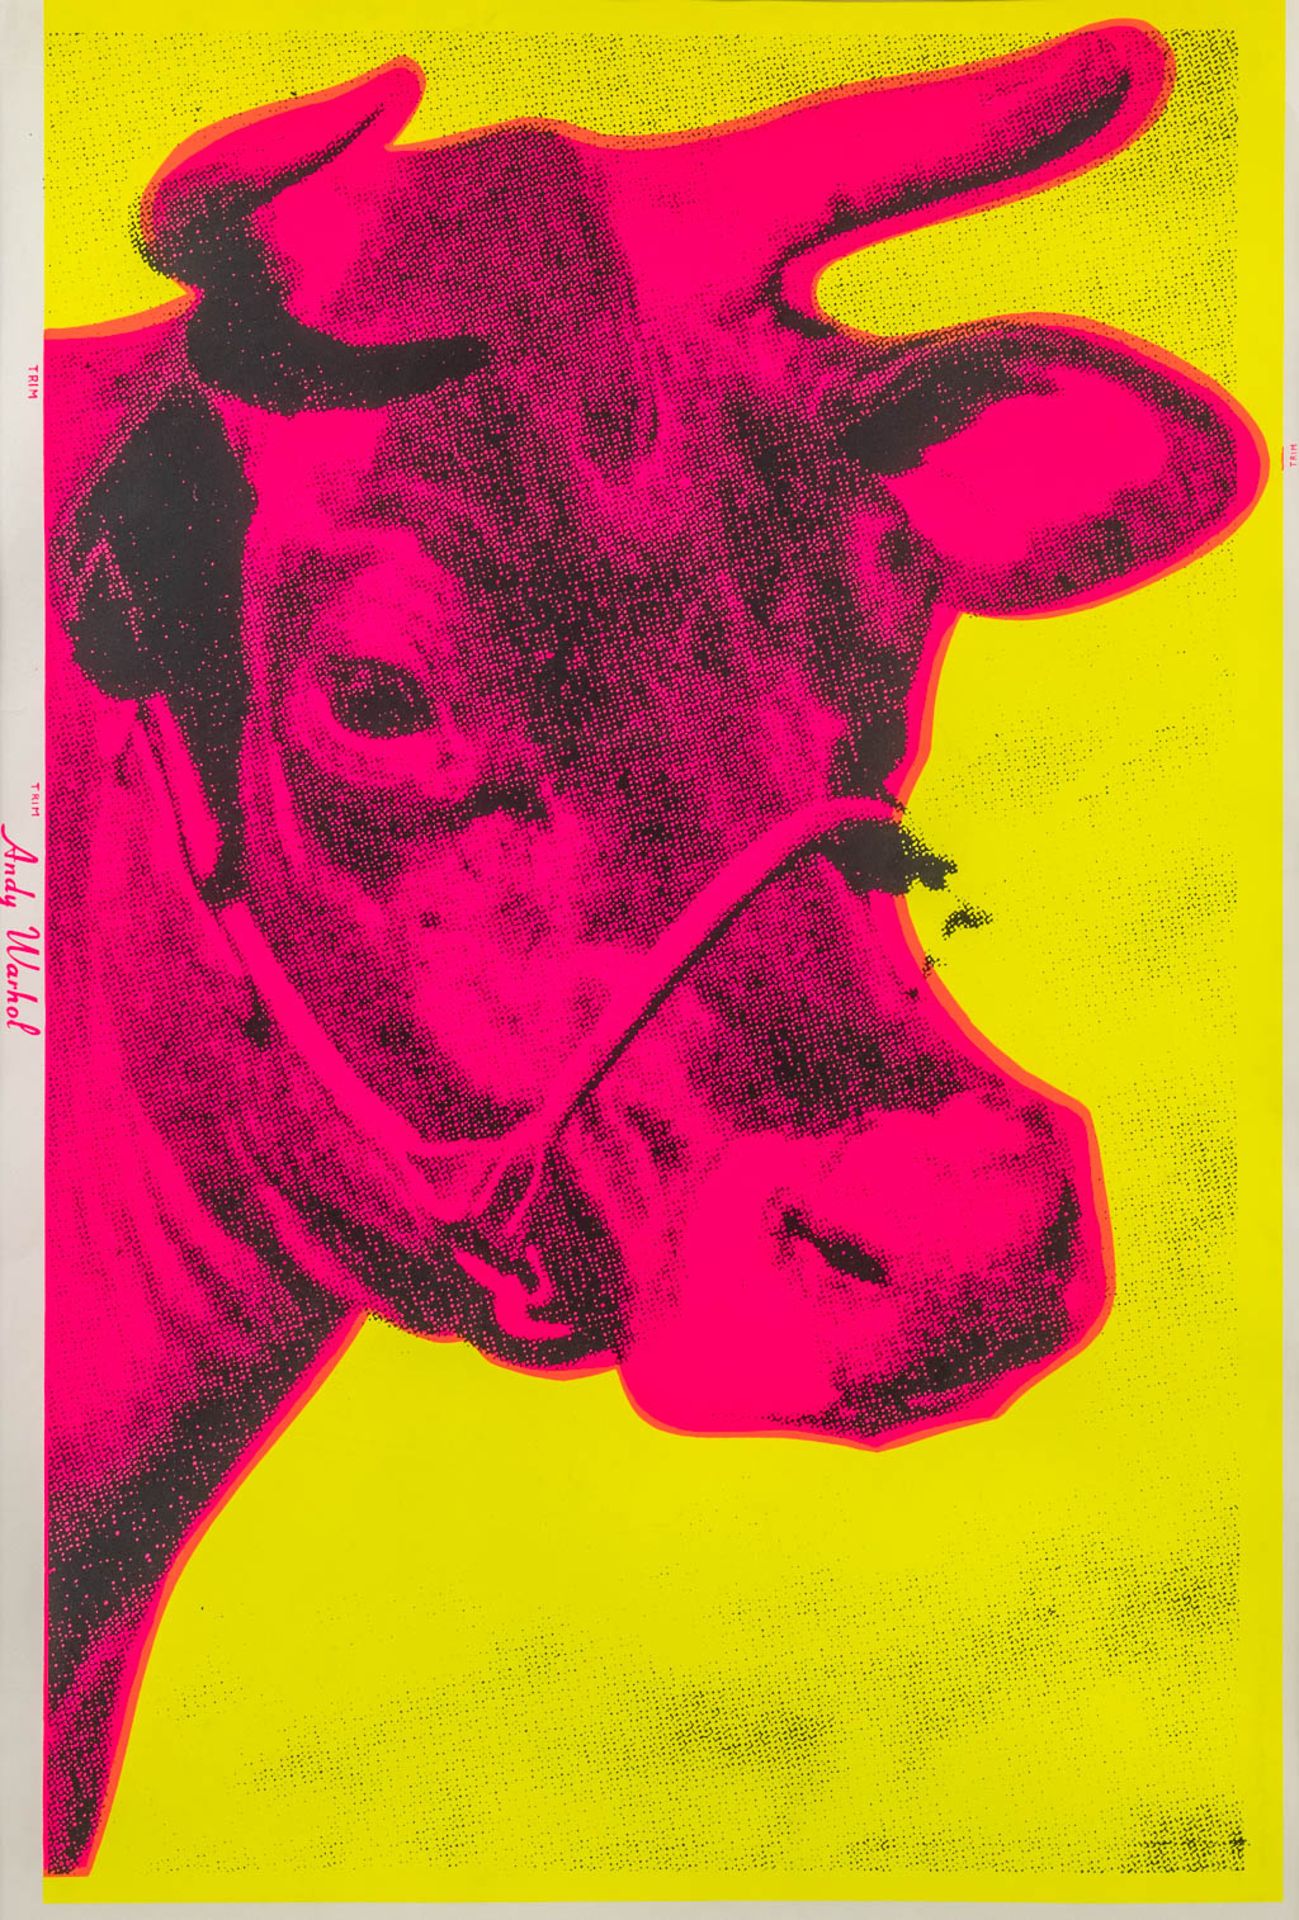 Andy WARHOL (1928-1987) 'Pink Cow', a lithography. (W:54 x H:84 cm)